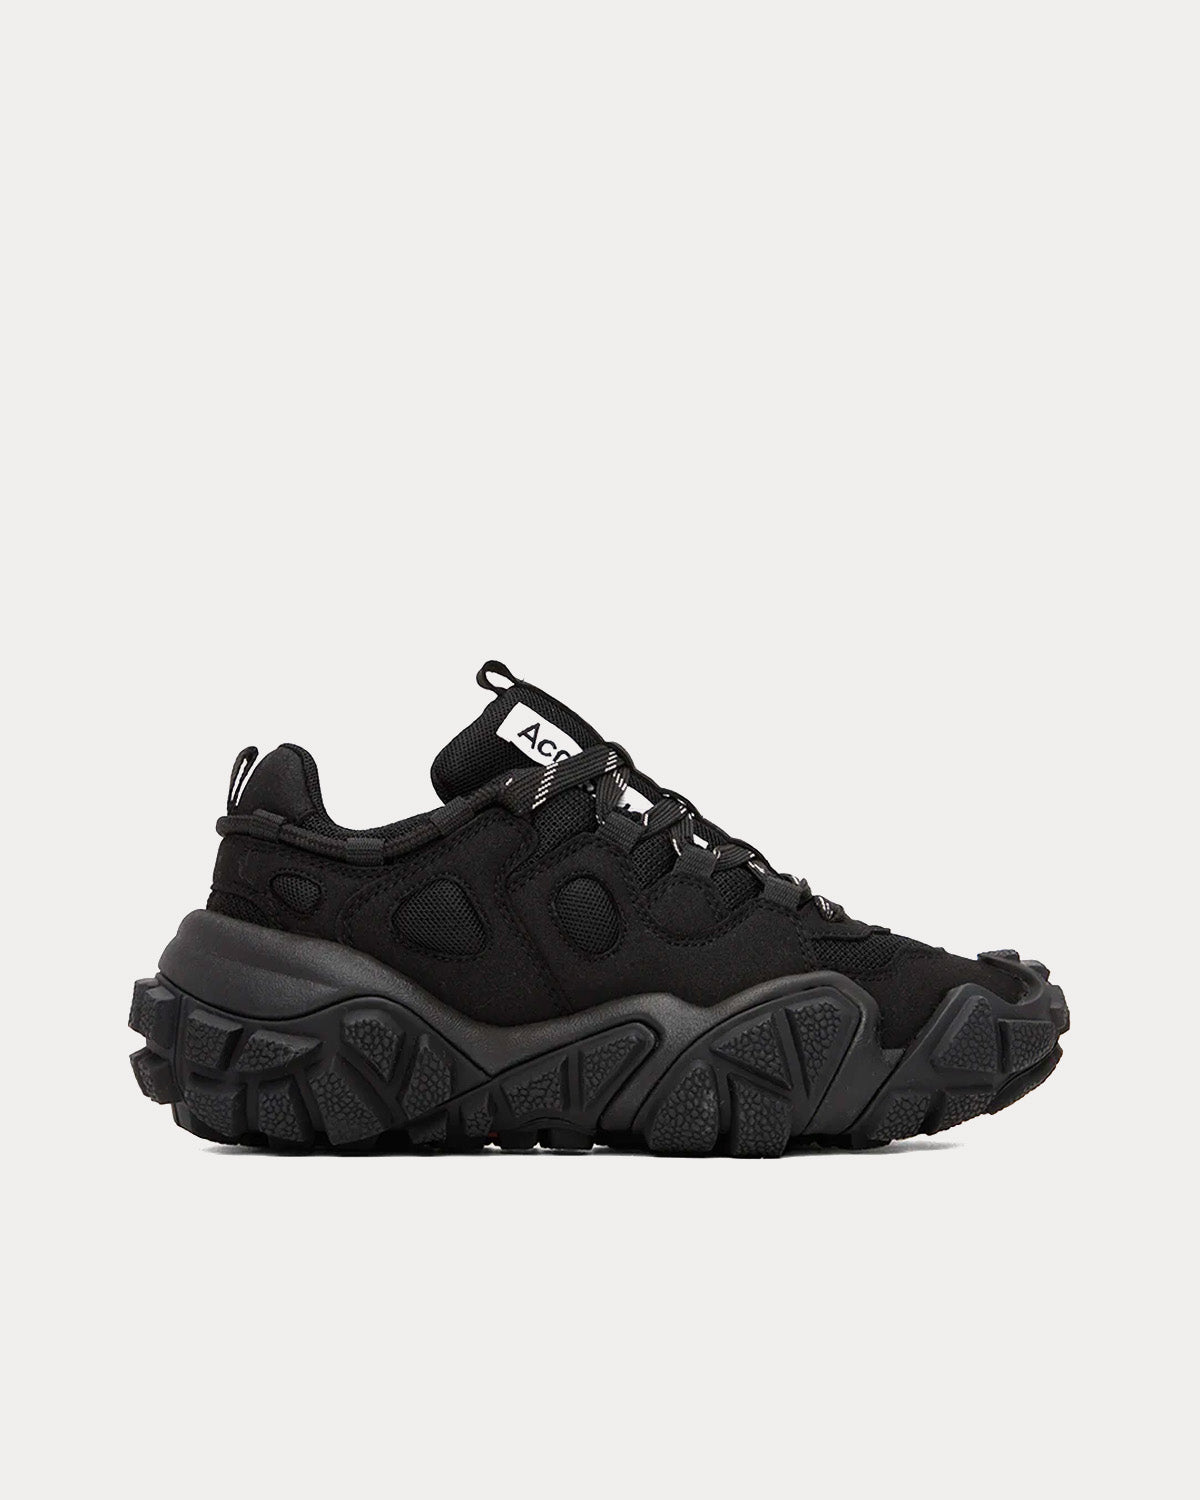 Acne Studios - Boltzer Chunky Mesh Black Low Top Sneakers